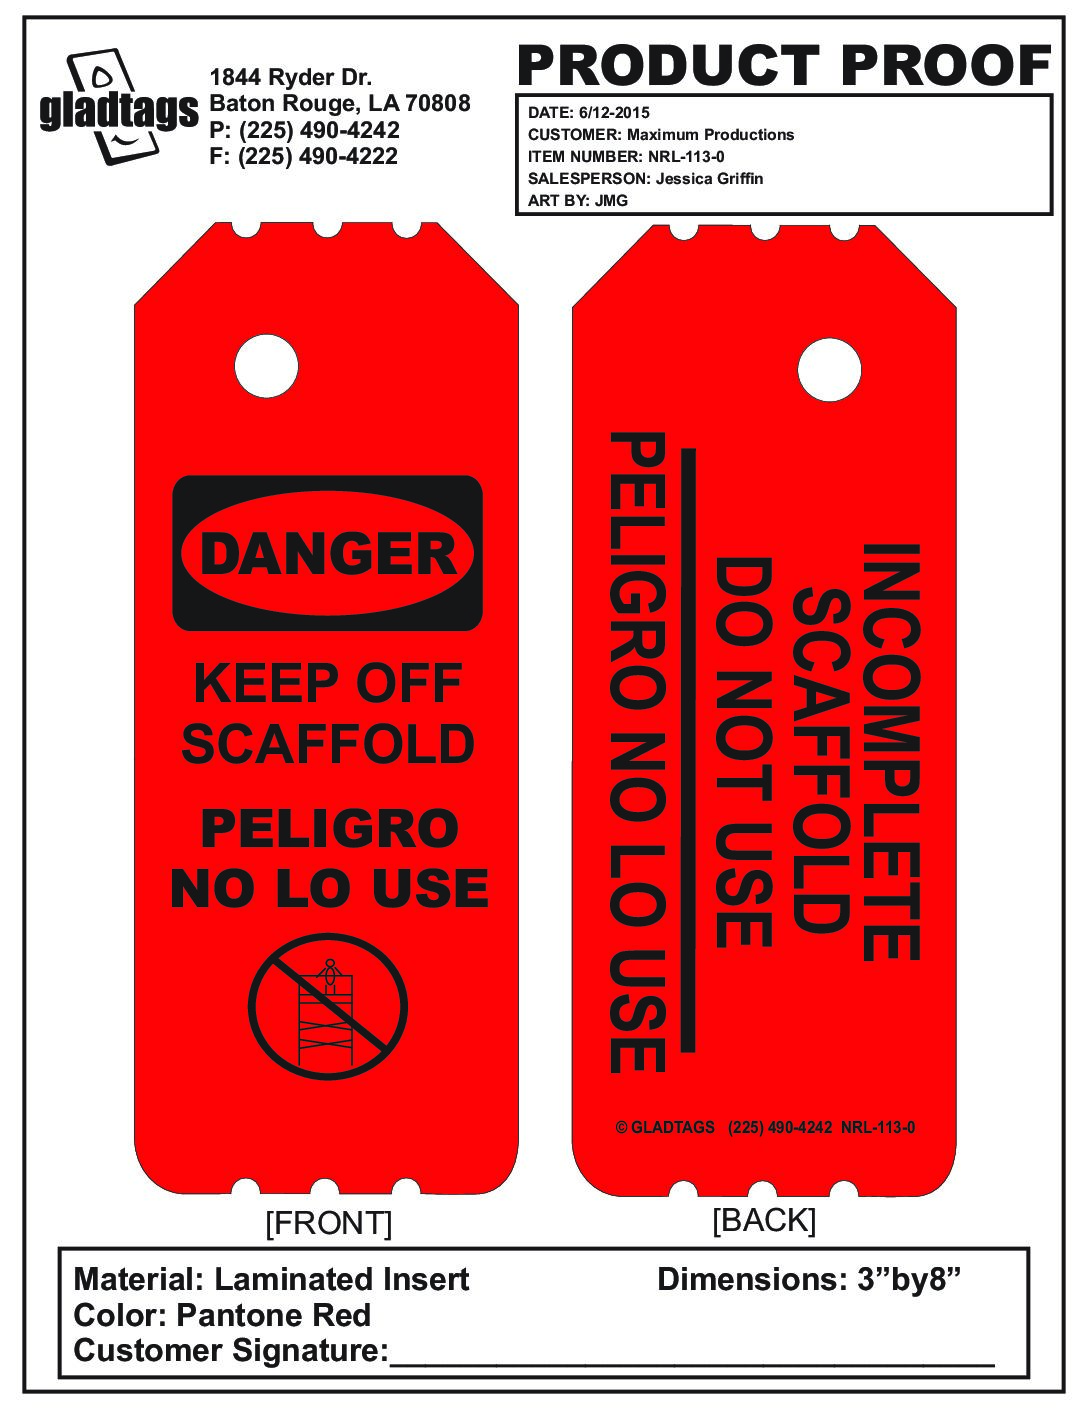 3.25X8 Red Laminated Danger Keep Off Scaffold with Pictograph Incomplete Scaffold on Back  – NRL-113-0